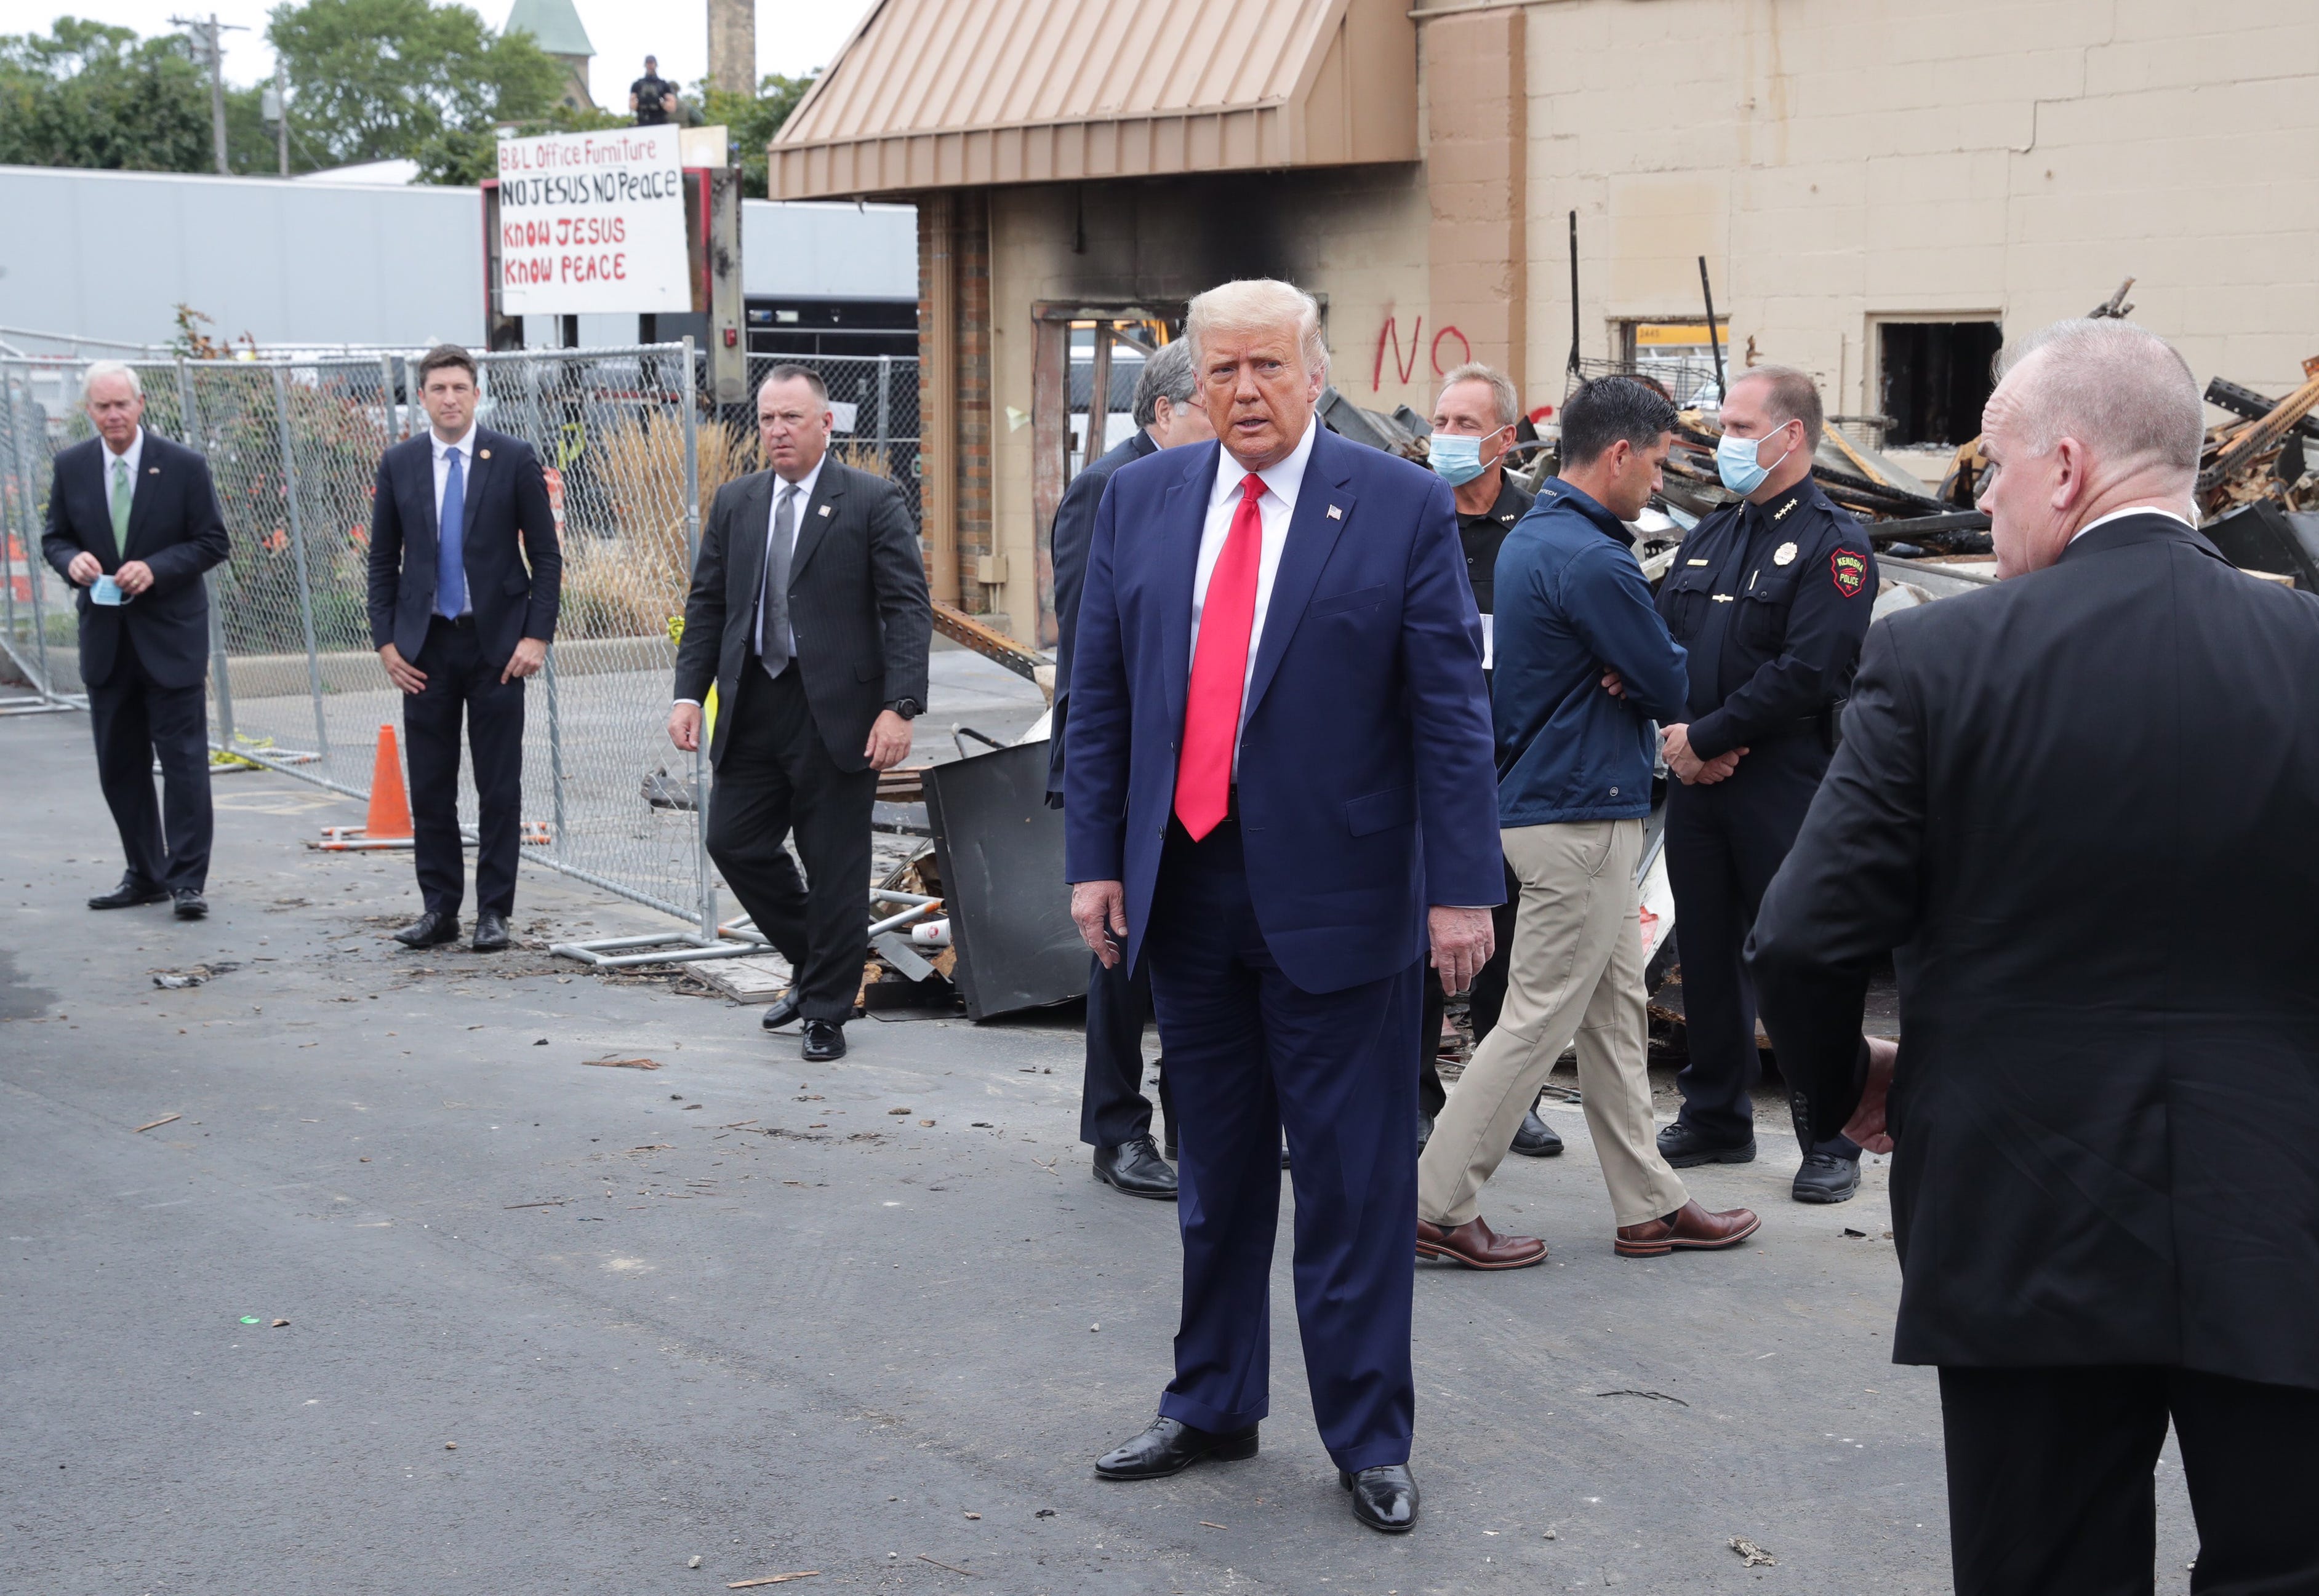 President Donald Trump inspects the remains of B&L Office Furniture on Tuesday, Sept. 1, 2020, in Kenosha, Wis.